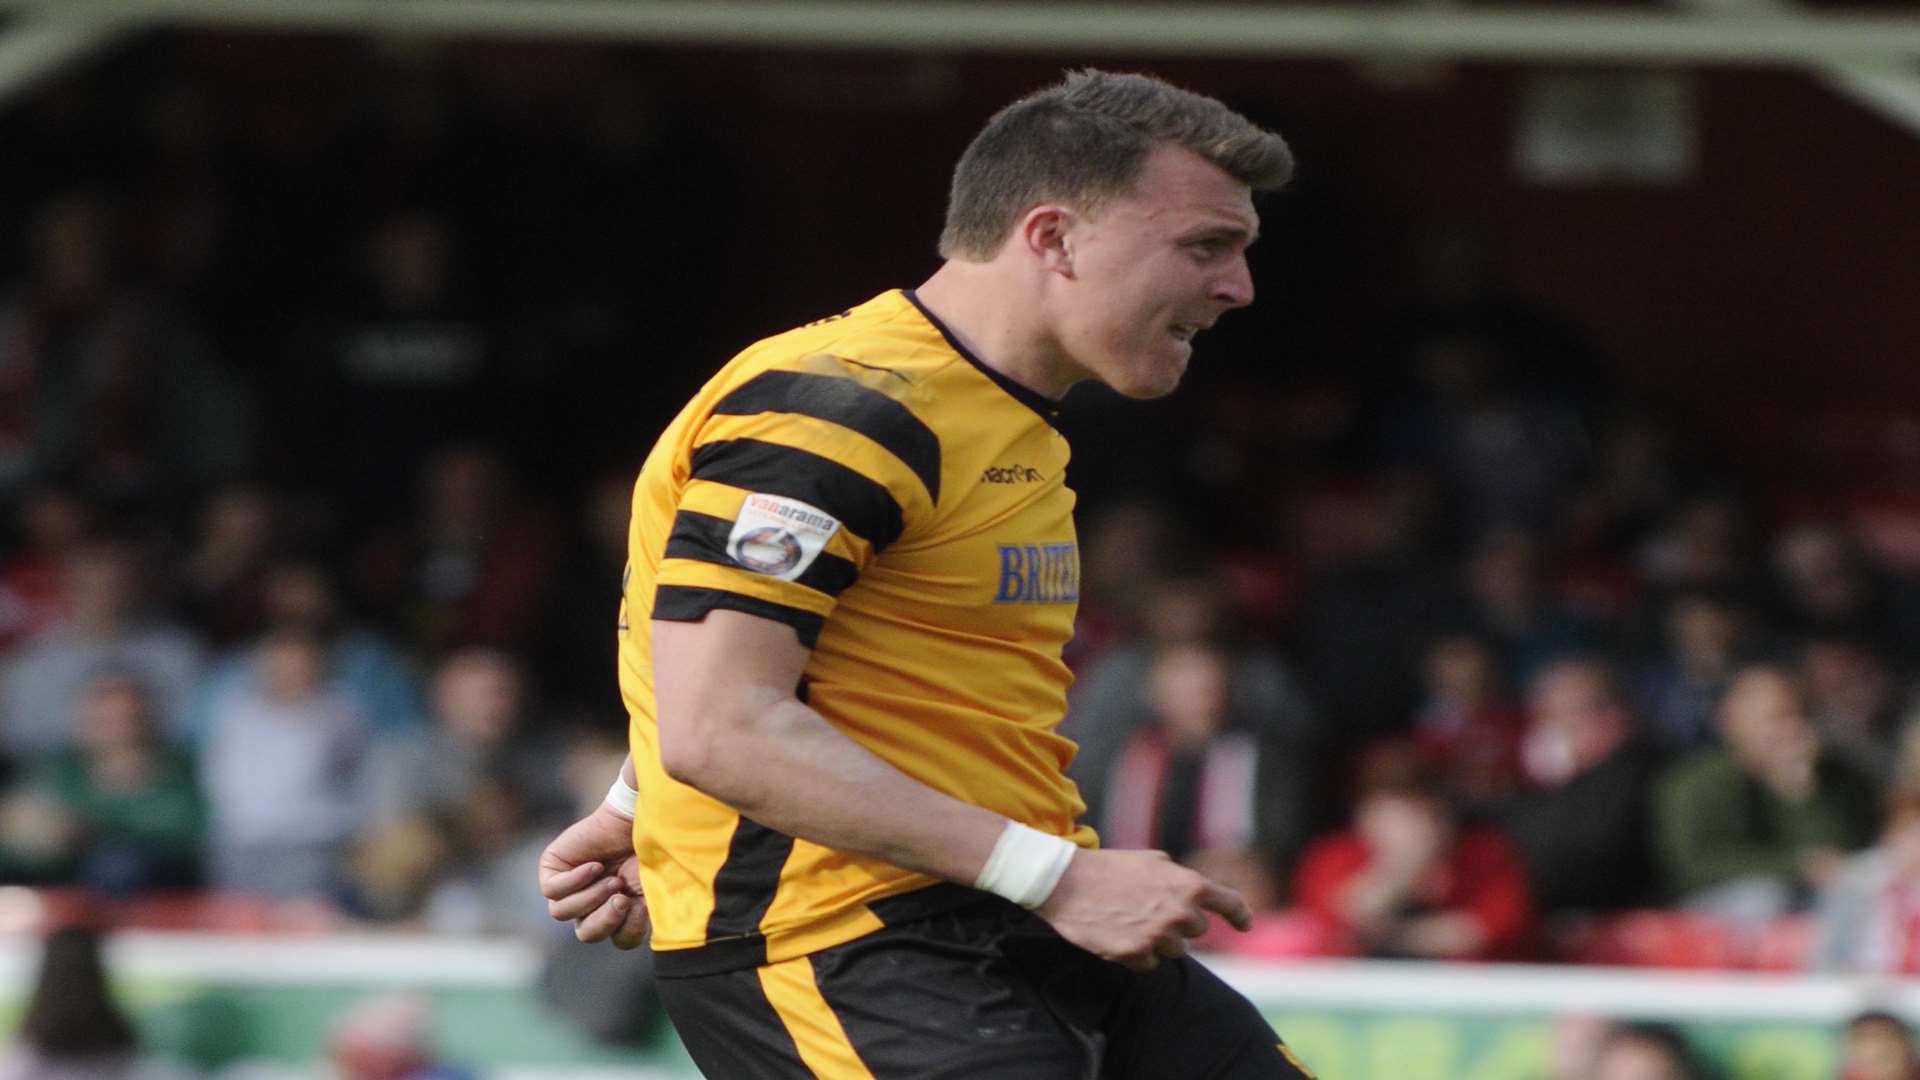 Maidstone forward Alex Flisher scores from the spot in play-off final shoot-out Picture: Gary Browne